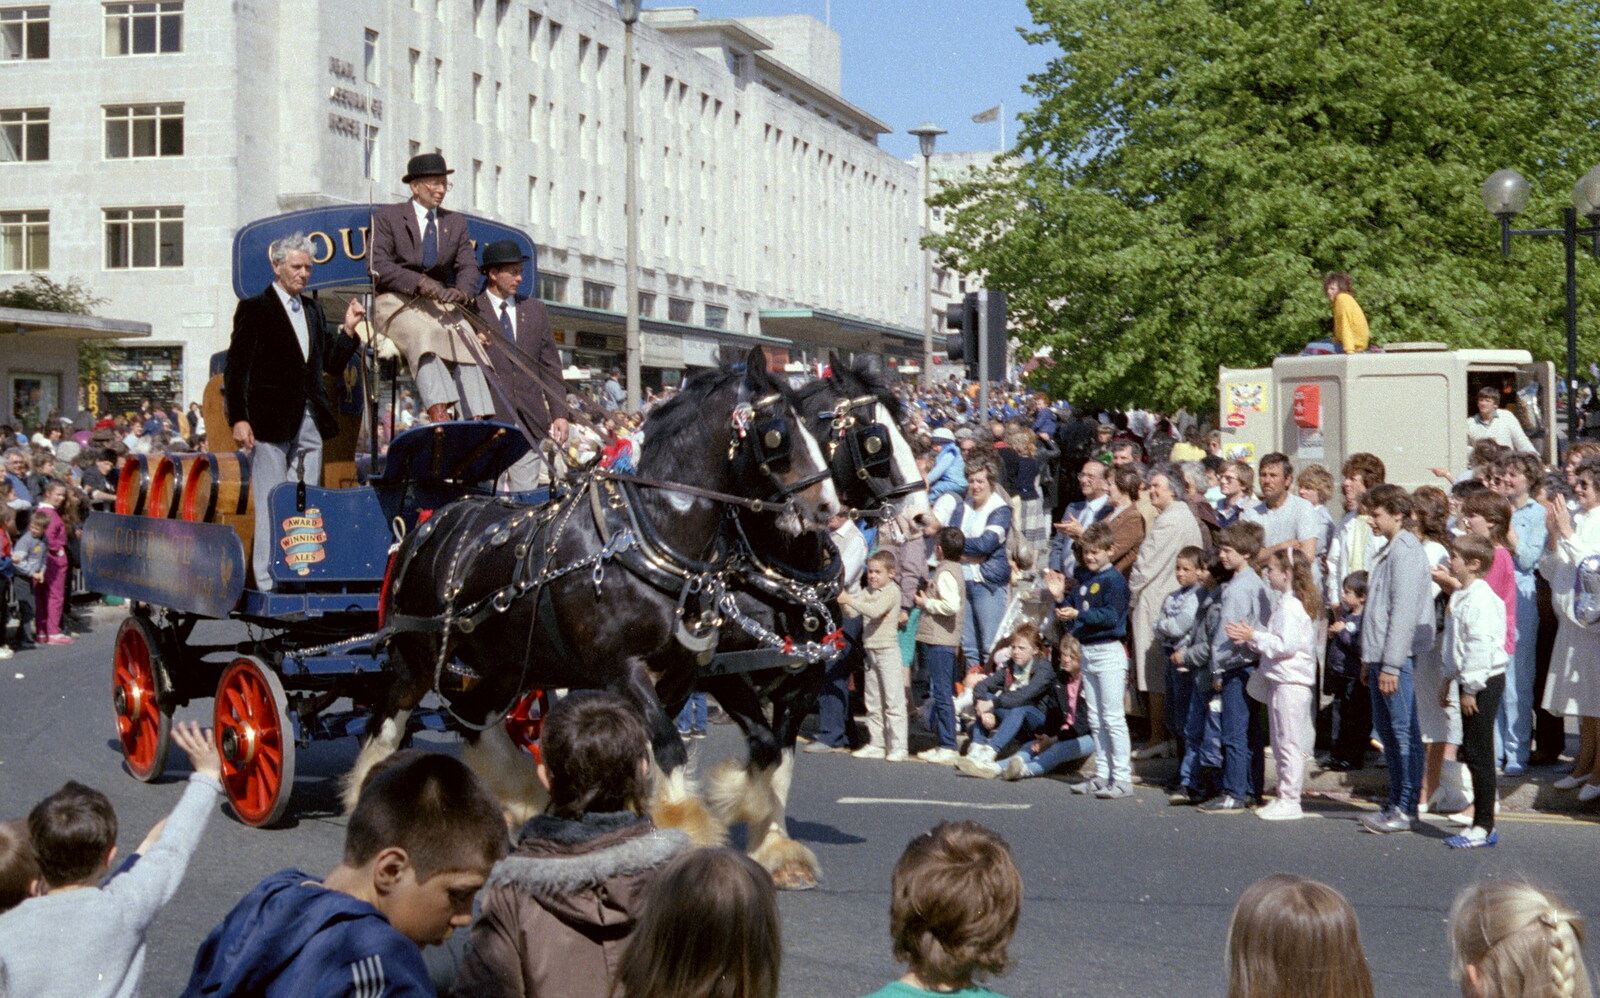 A Courage Brewery dray from Uni: The Lord Mayor's Procession, Plymouth, Devon - 21st May 1986